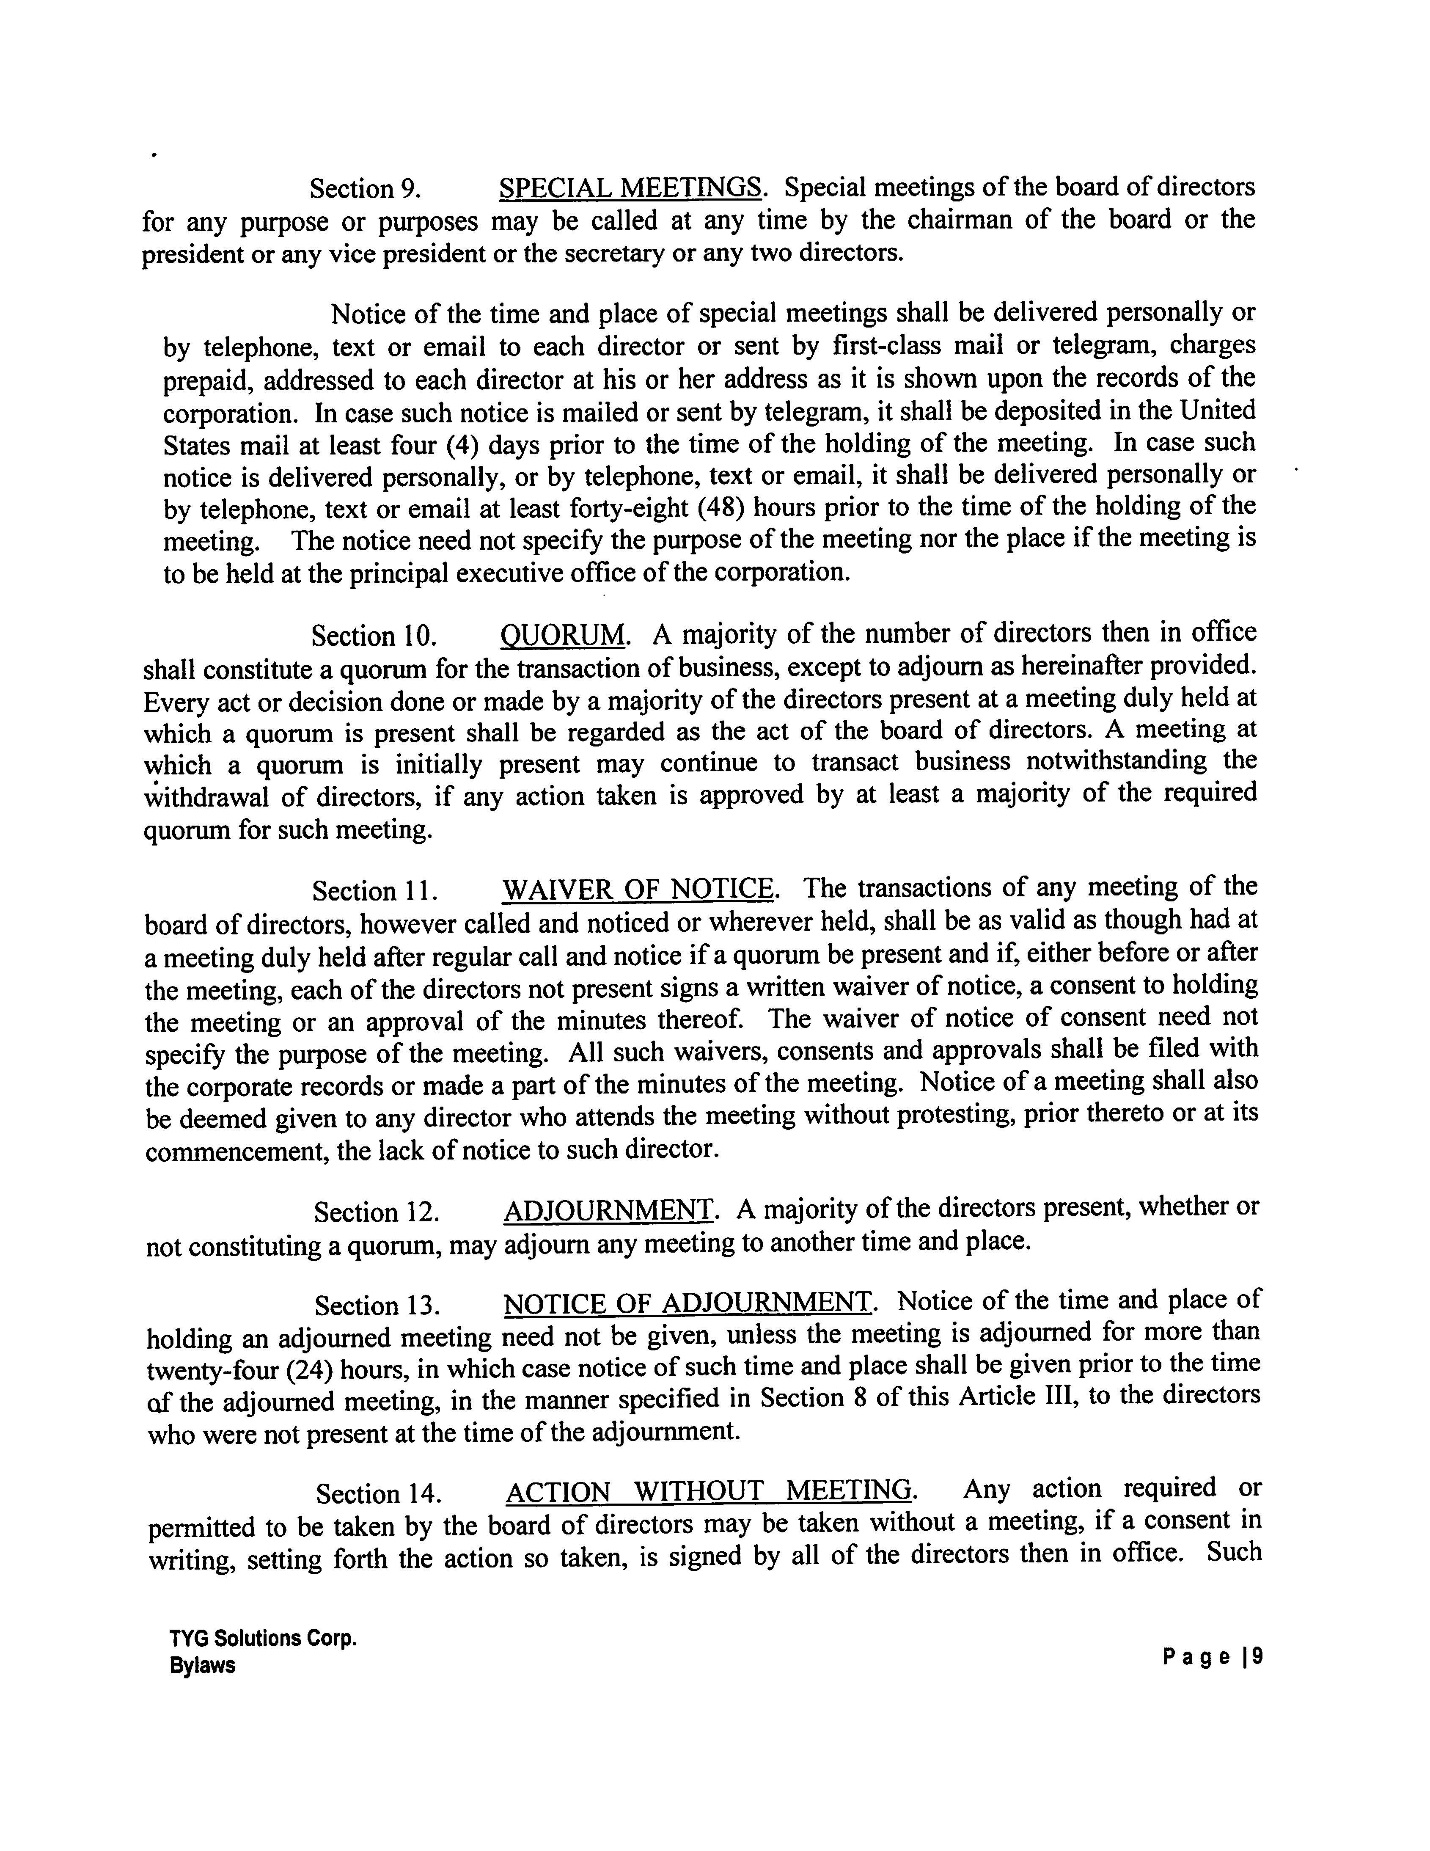 Ex. 3.3 Amended Articles and Bylaws_Page_09.jpg